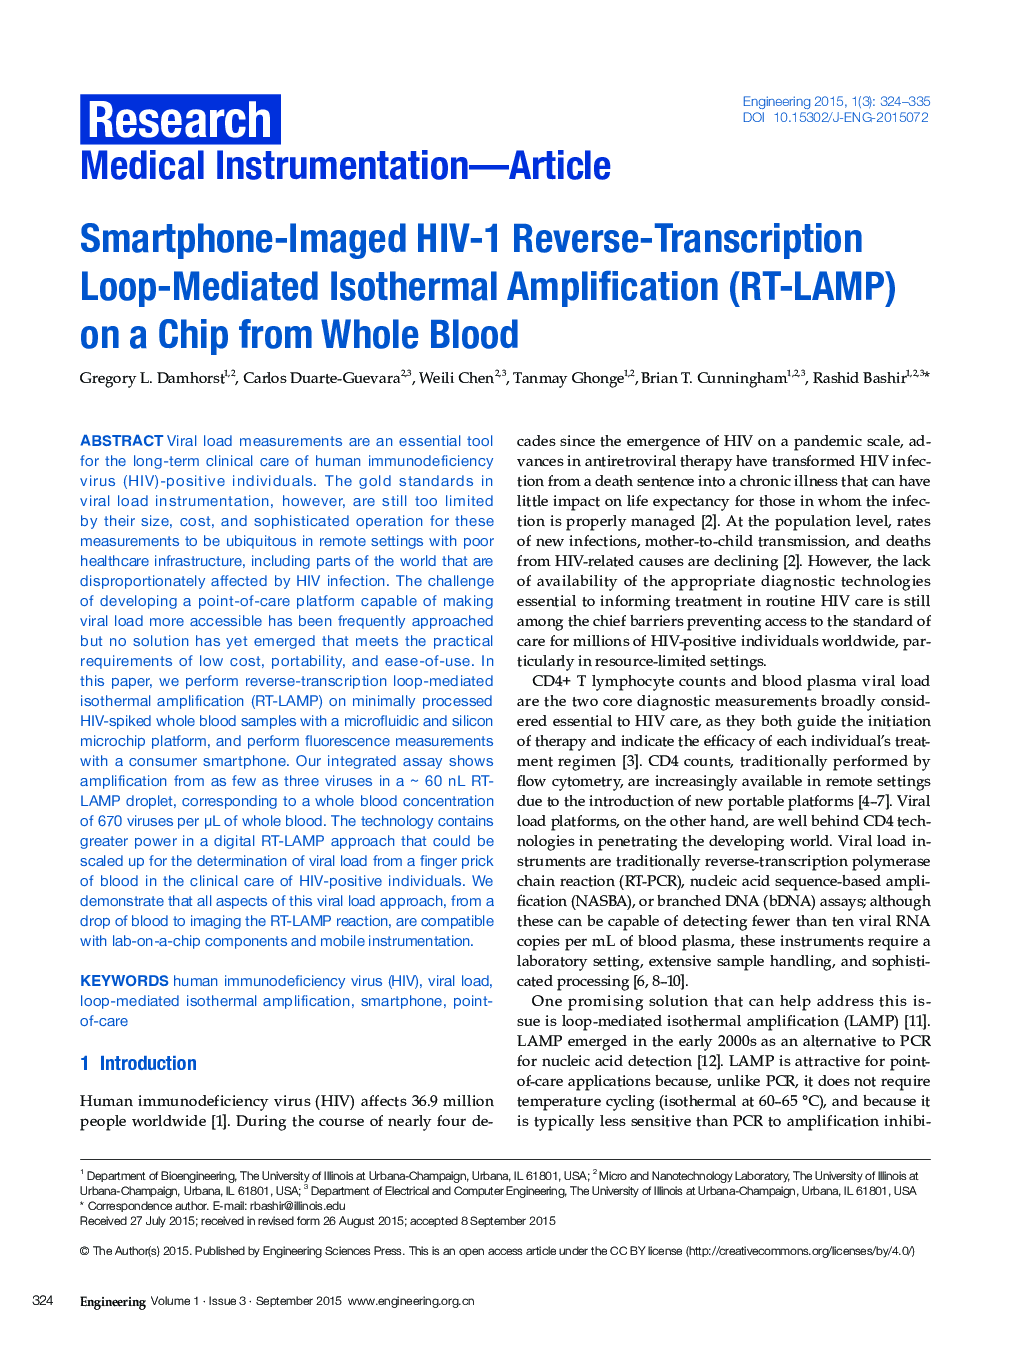 Smartphone-Imaged HIV-1 Reverse-Transcription Loop-Mediated Isothermal Amplification (RT-LAMP) on a Chip from Whole Blood